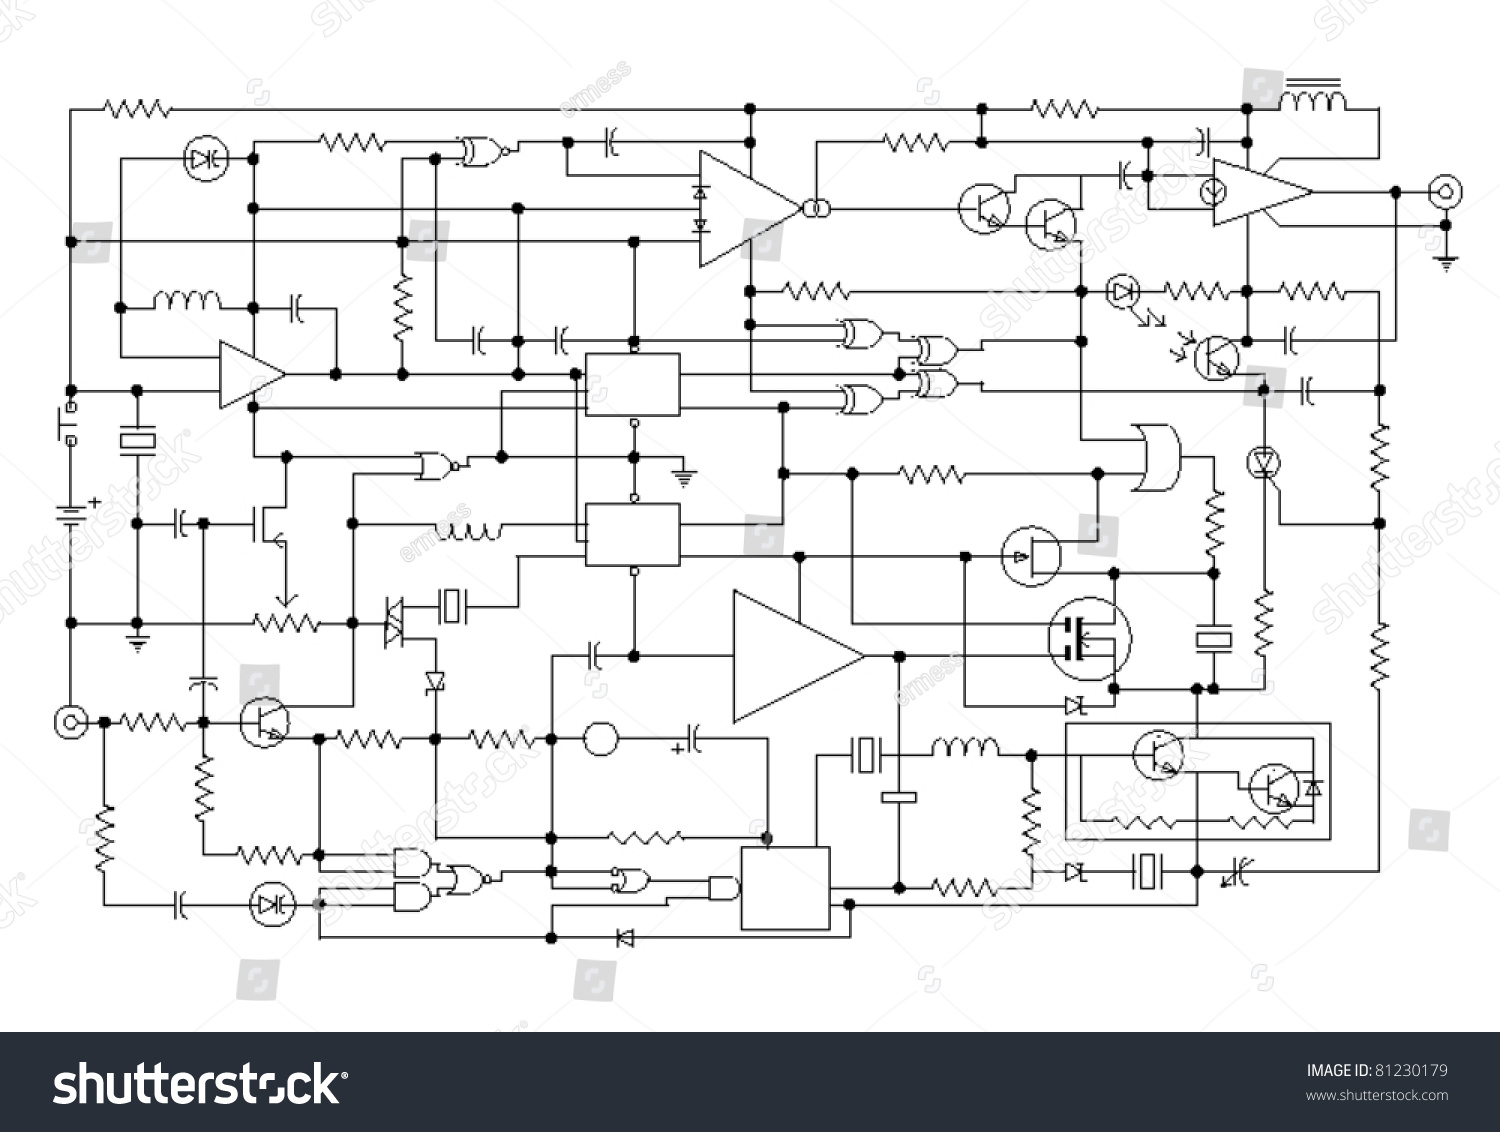 Schematic Diagram Project Of Electronic Circuit Graphic Design Of Electronic Components And Semiconductor